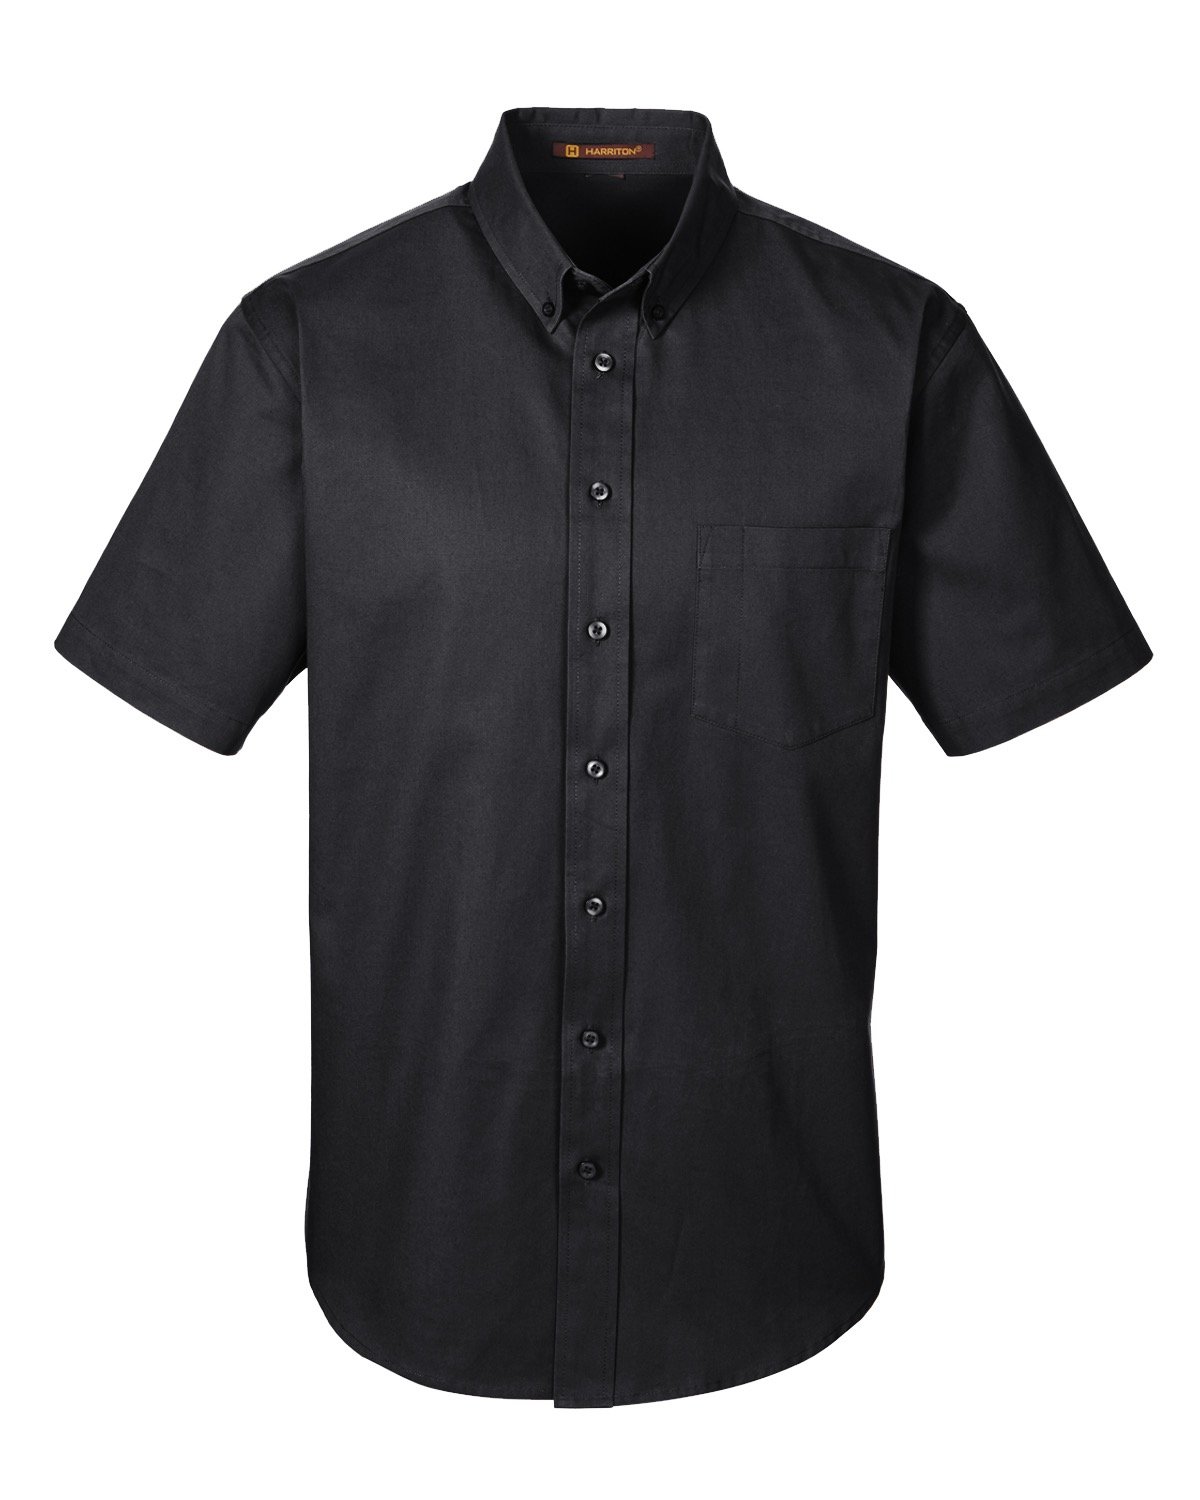 Picture of Harriton Men's Foundation 100% Cotton Short-Sleeve Twill Shirt with Teflon